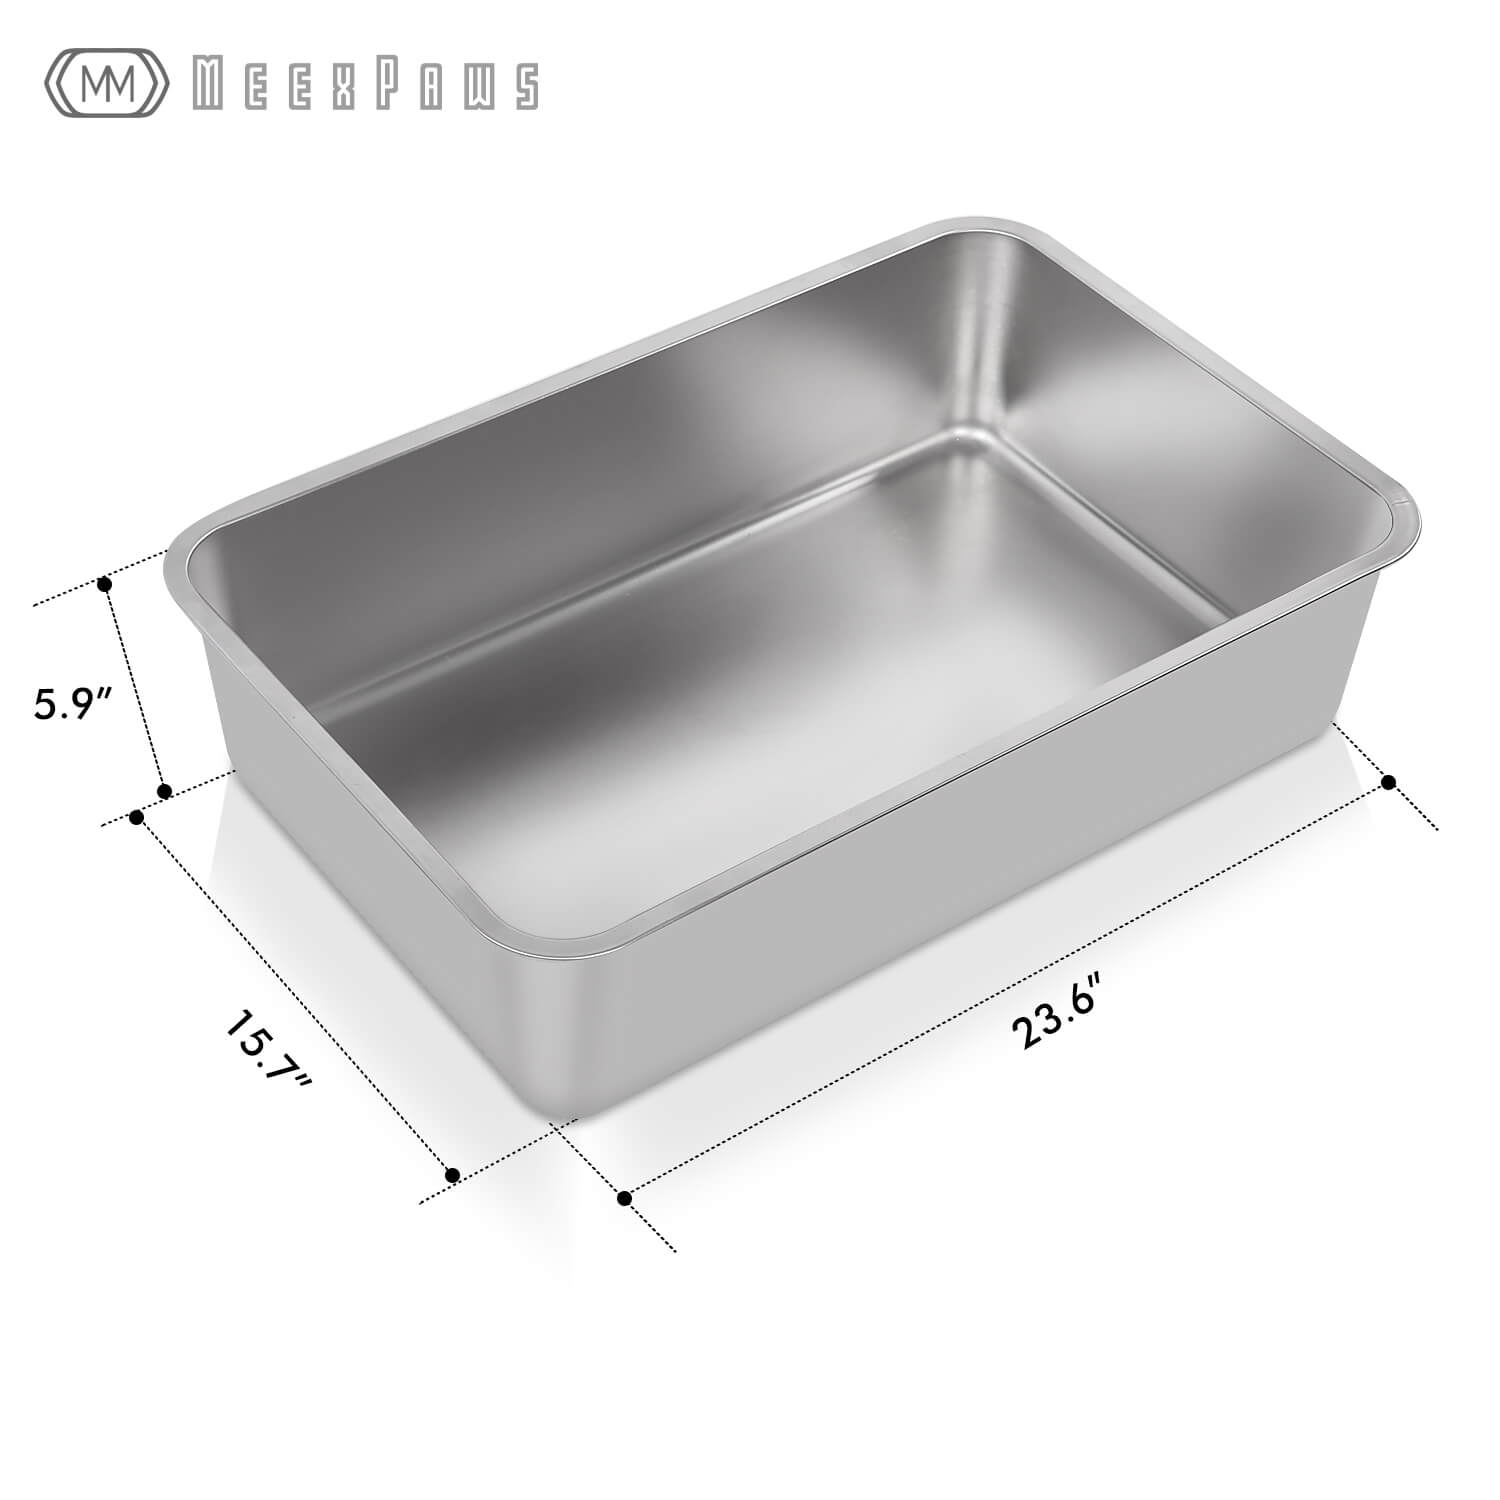 meexpaws extra large stainless steel litter box kit